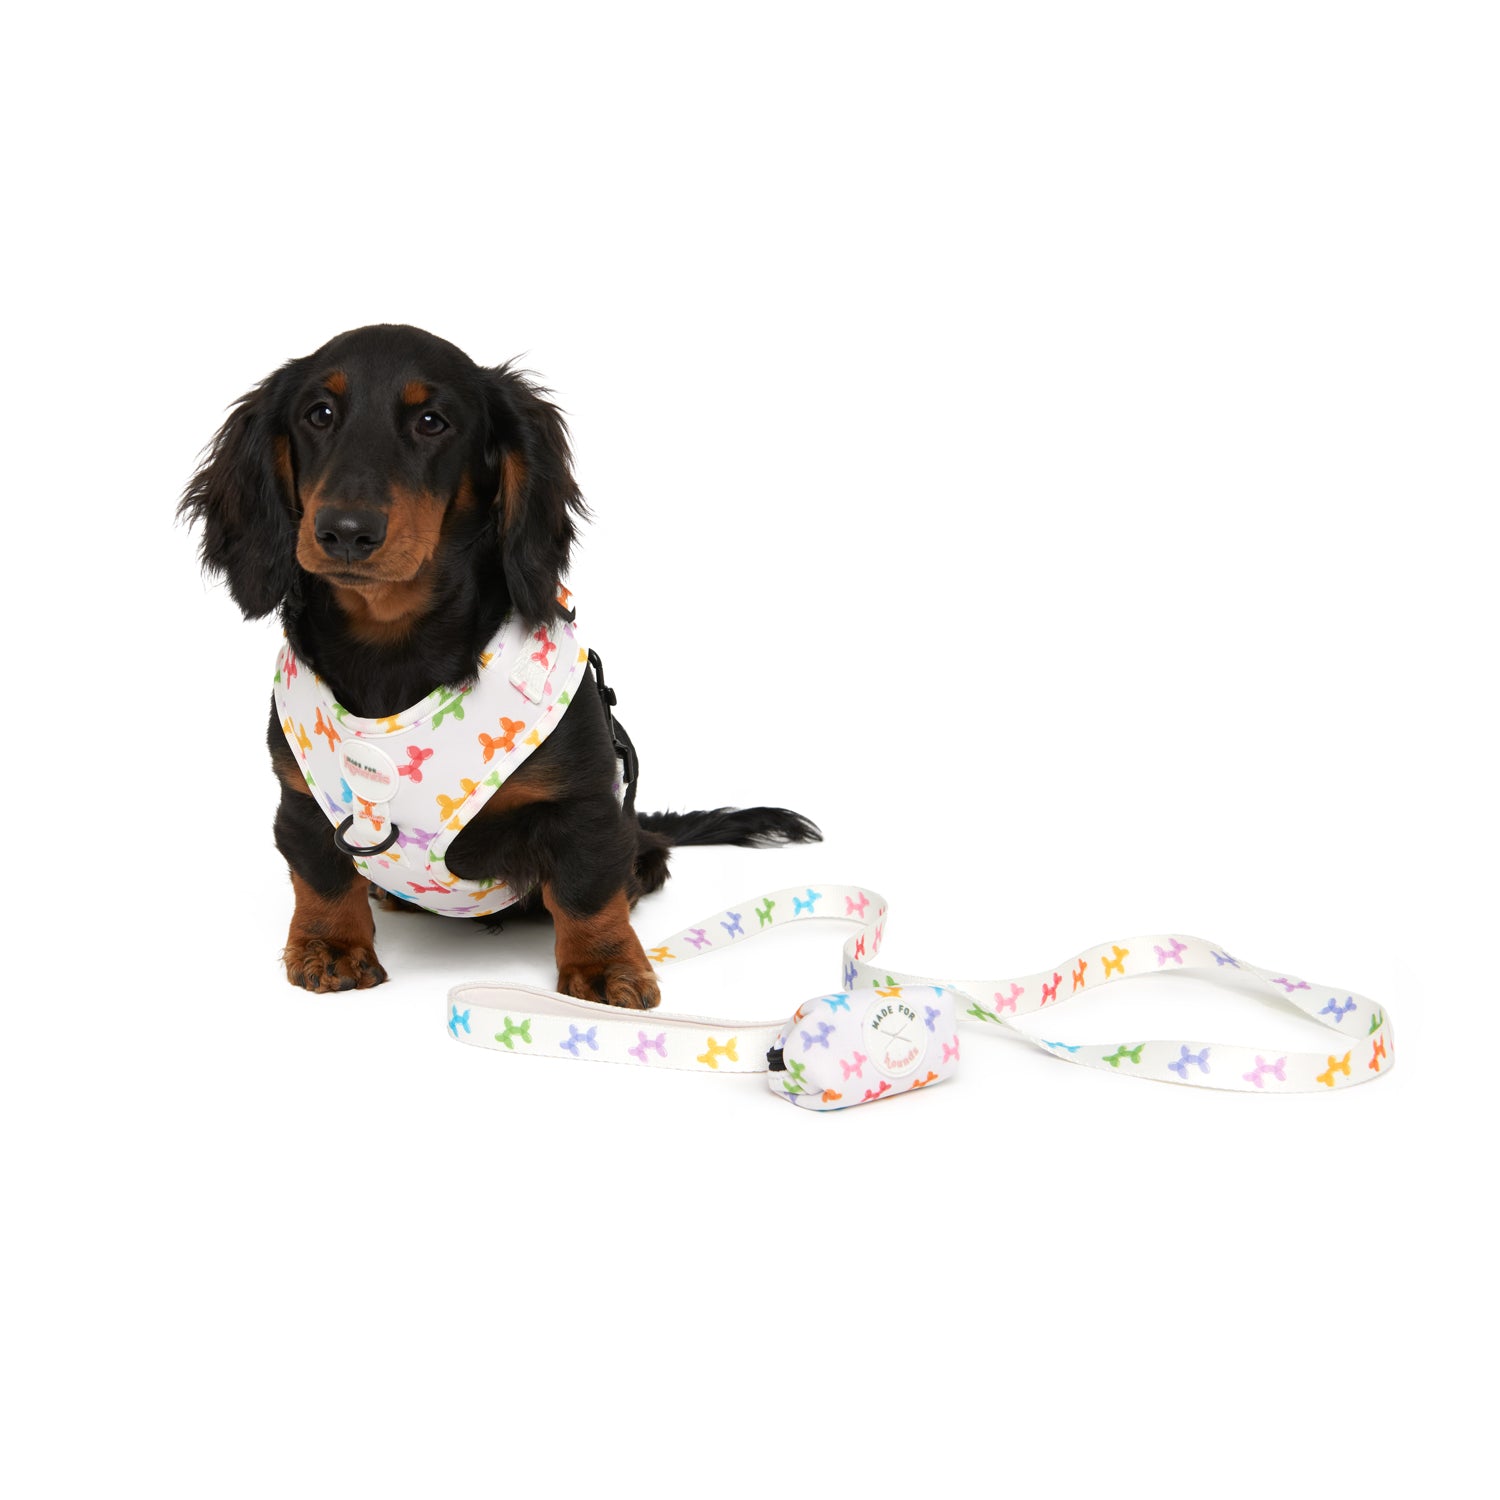 The Party Dog Harness Set